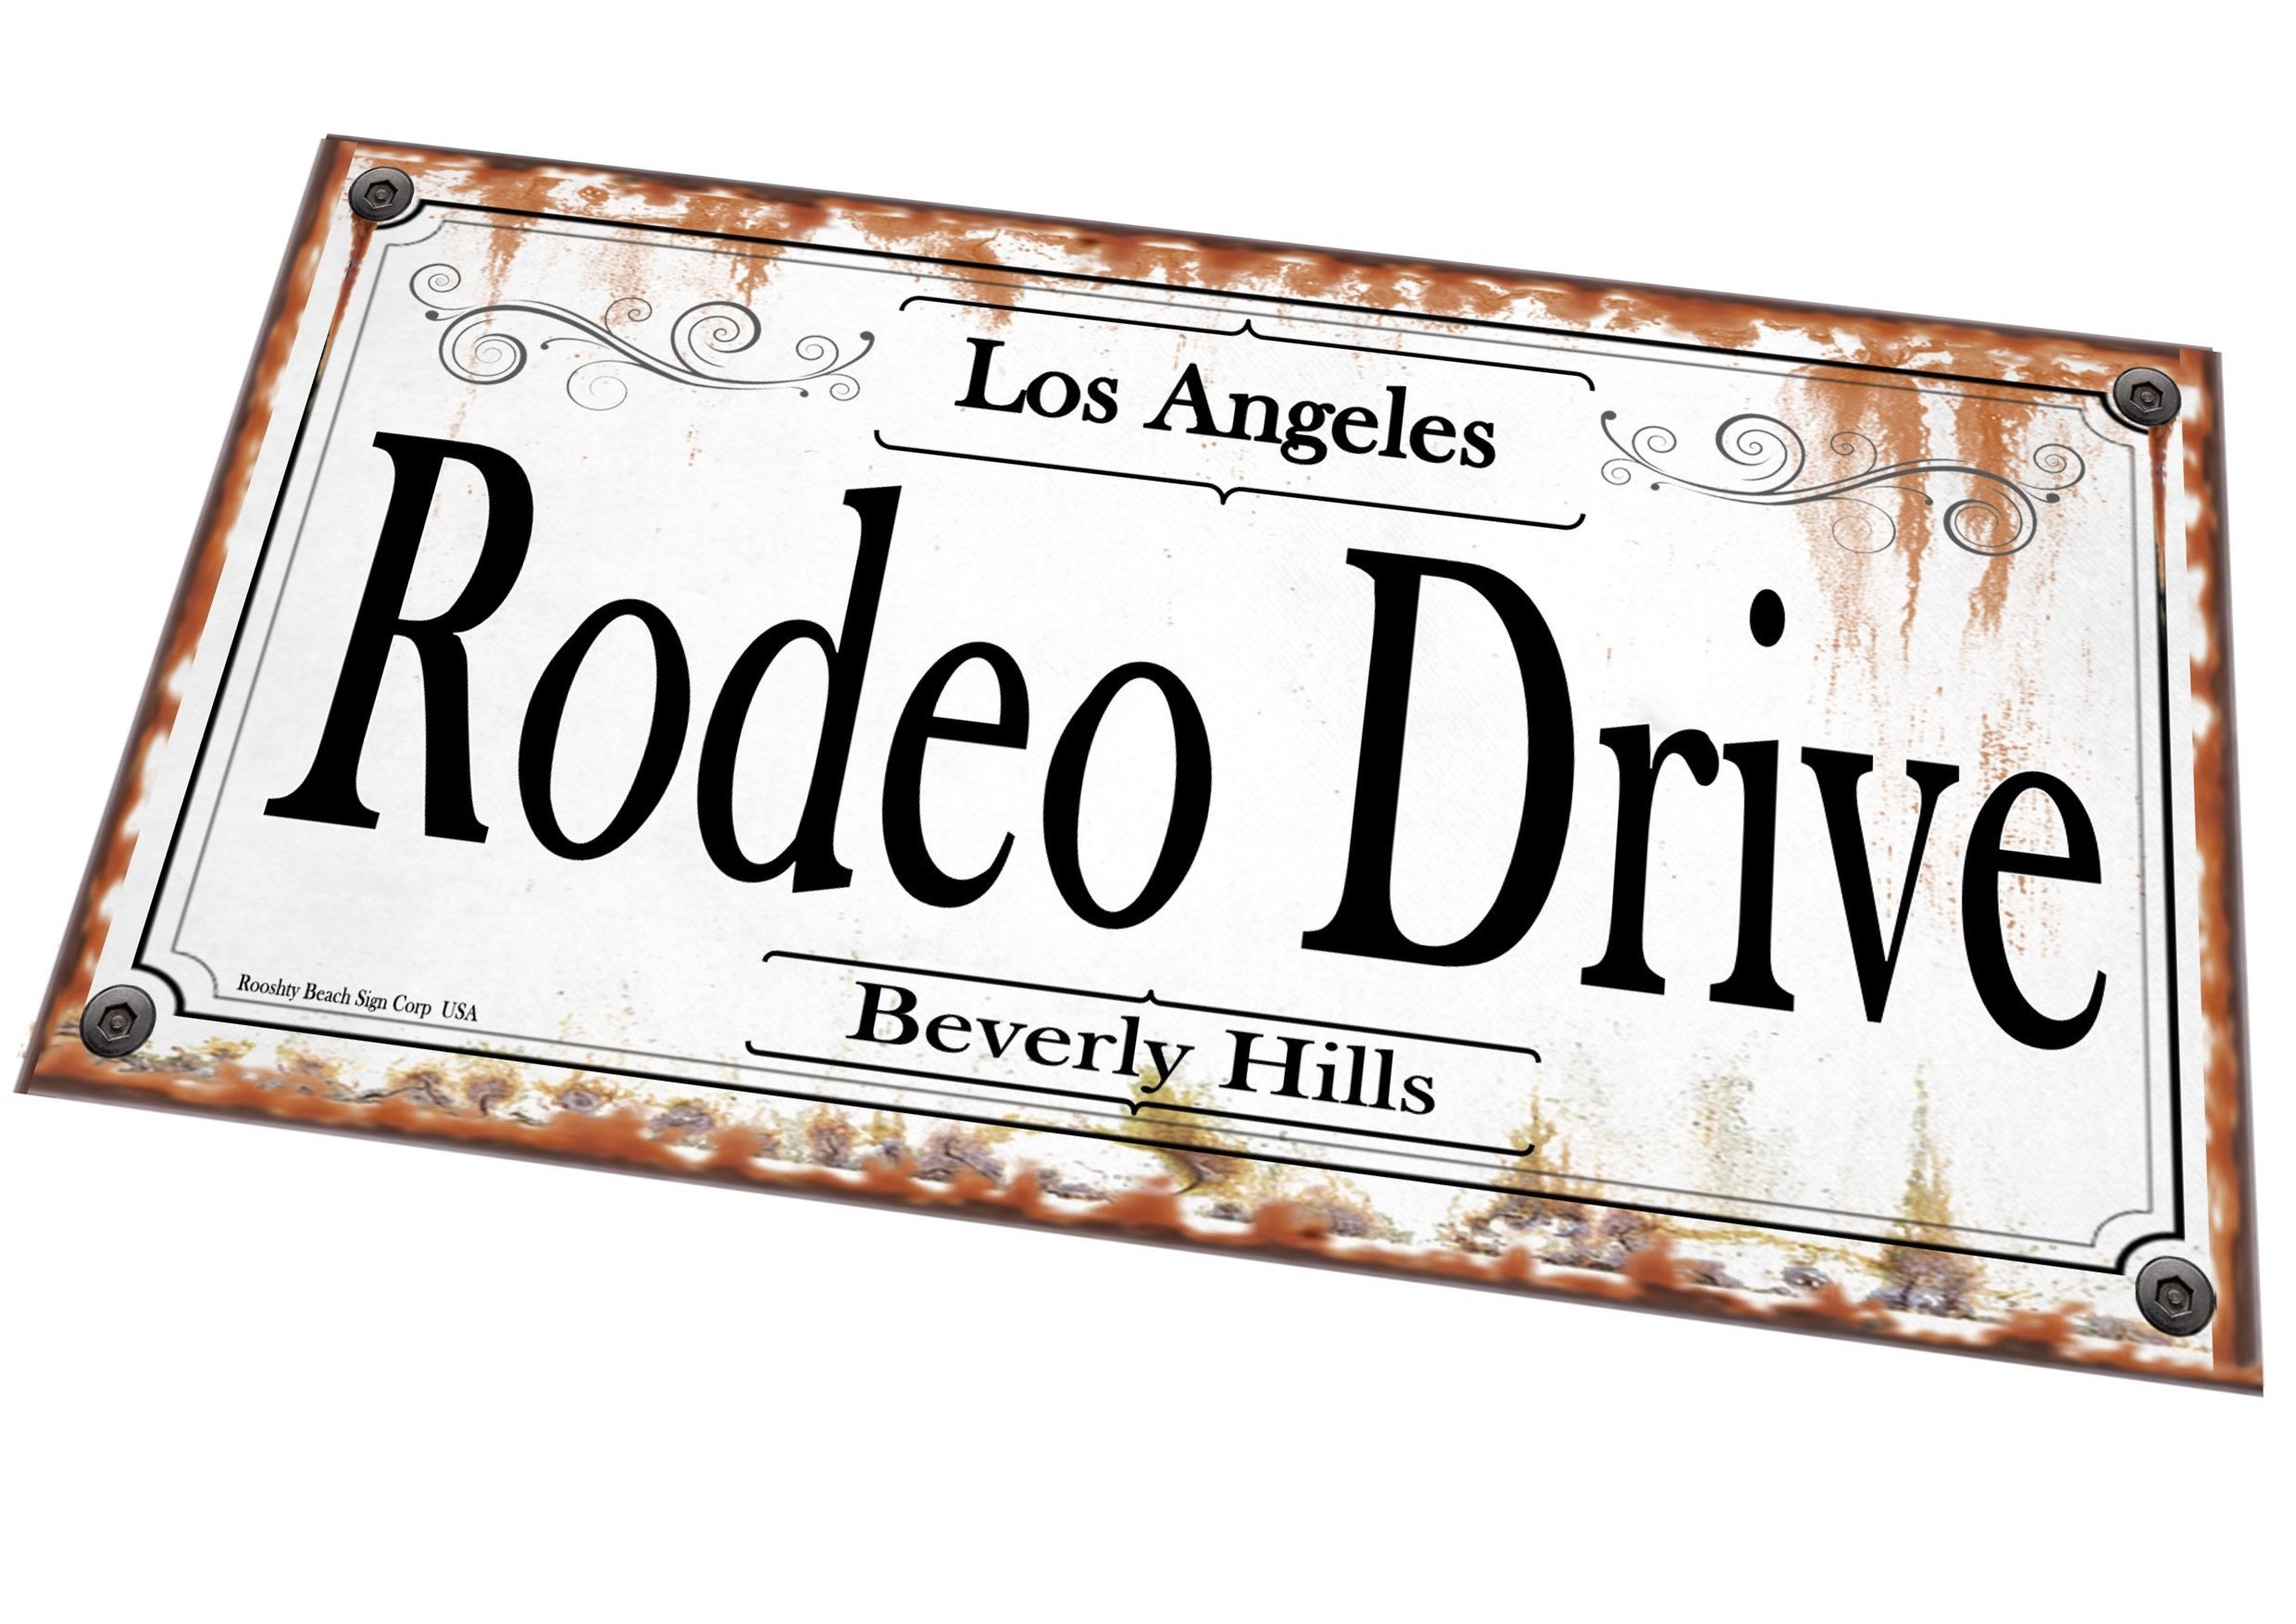 Rodeo Drive Street Sign Vintage Style Los Angeles Road Street 